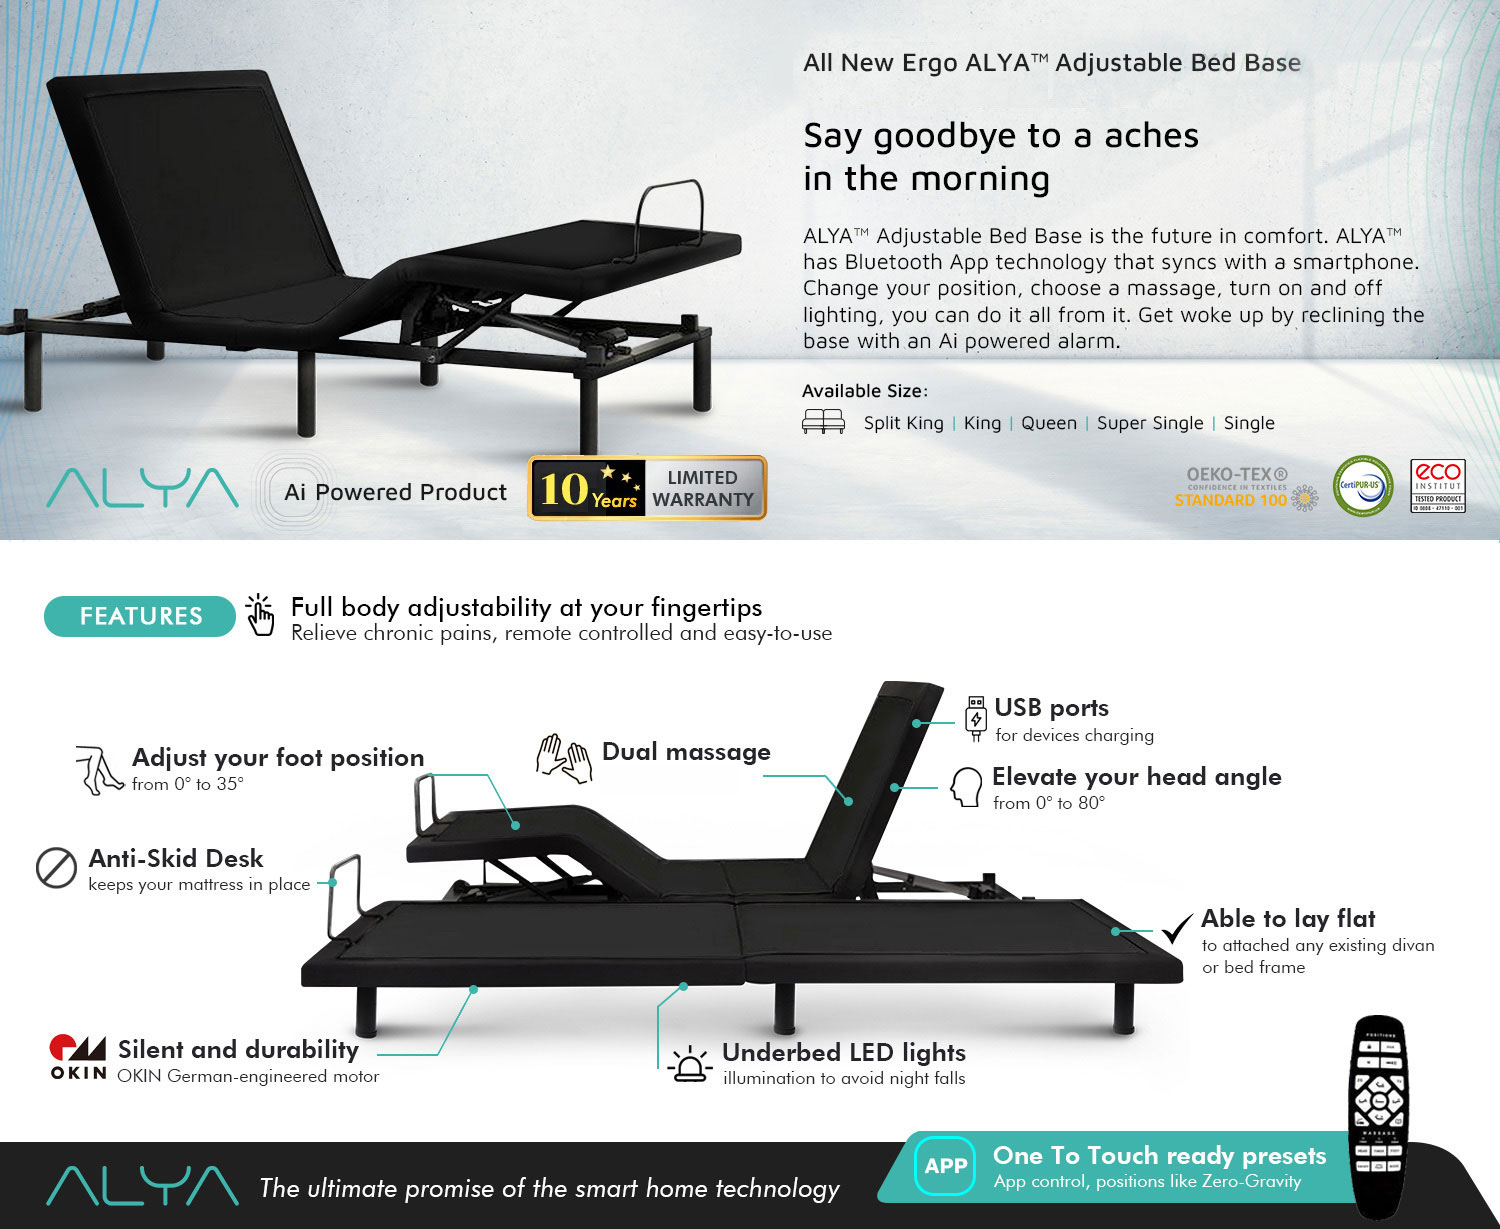 alya-adjustable-bed-base-features